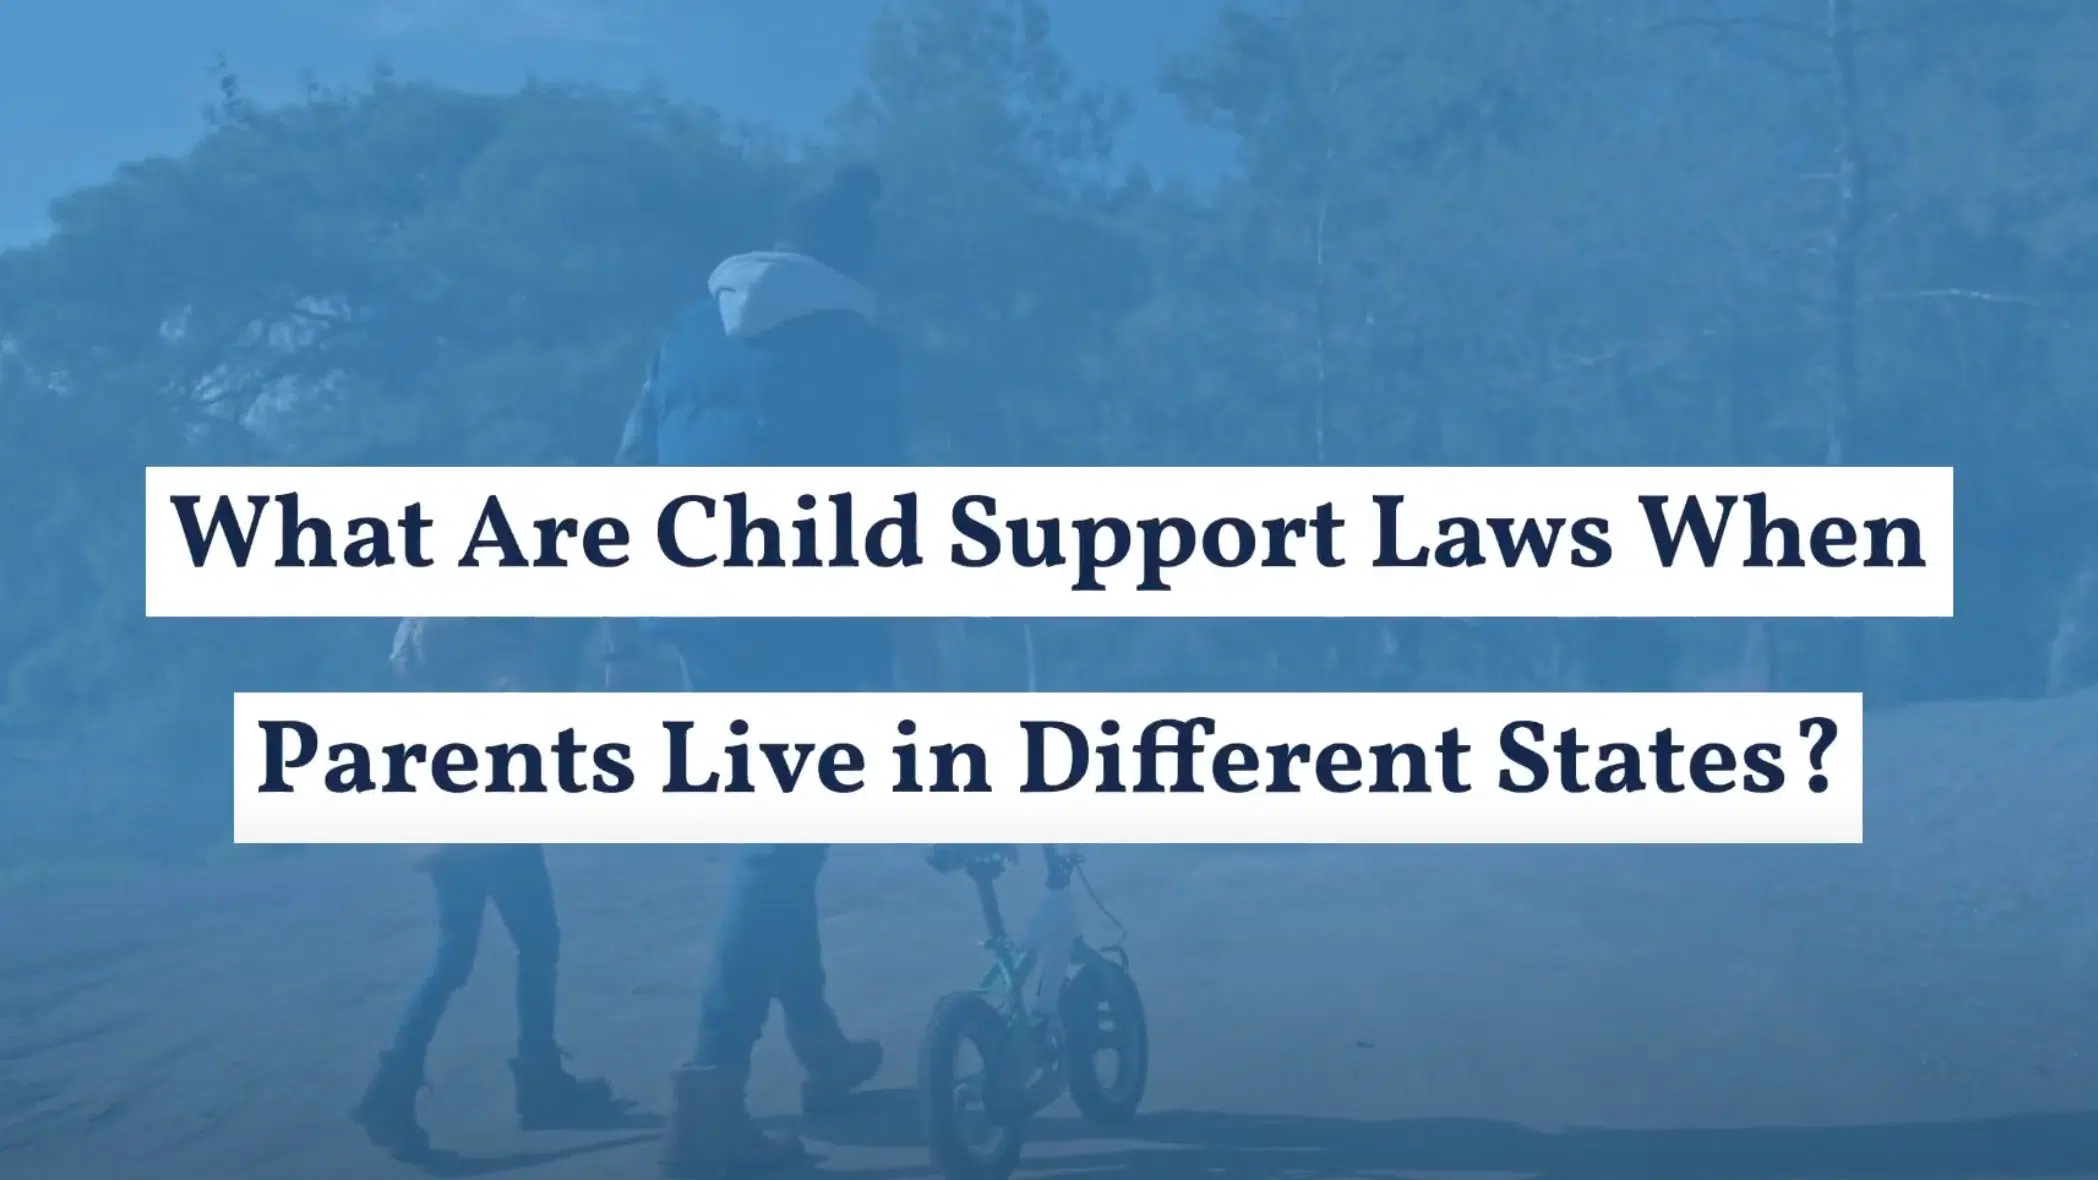 Child Support Laws When Parents Live in Different States